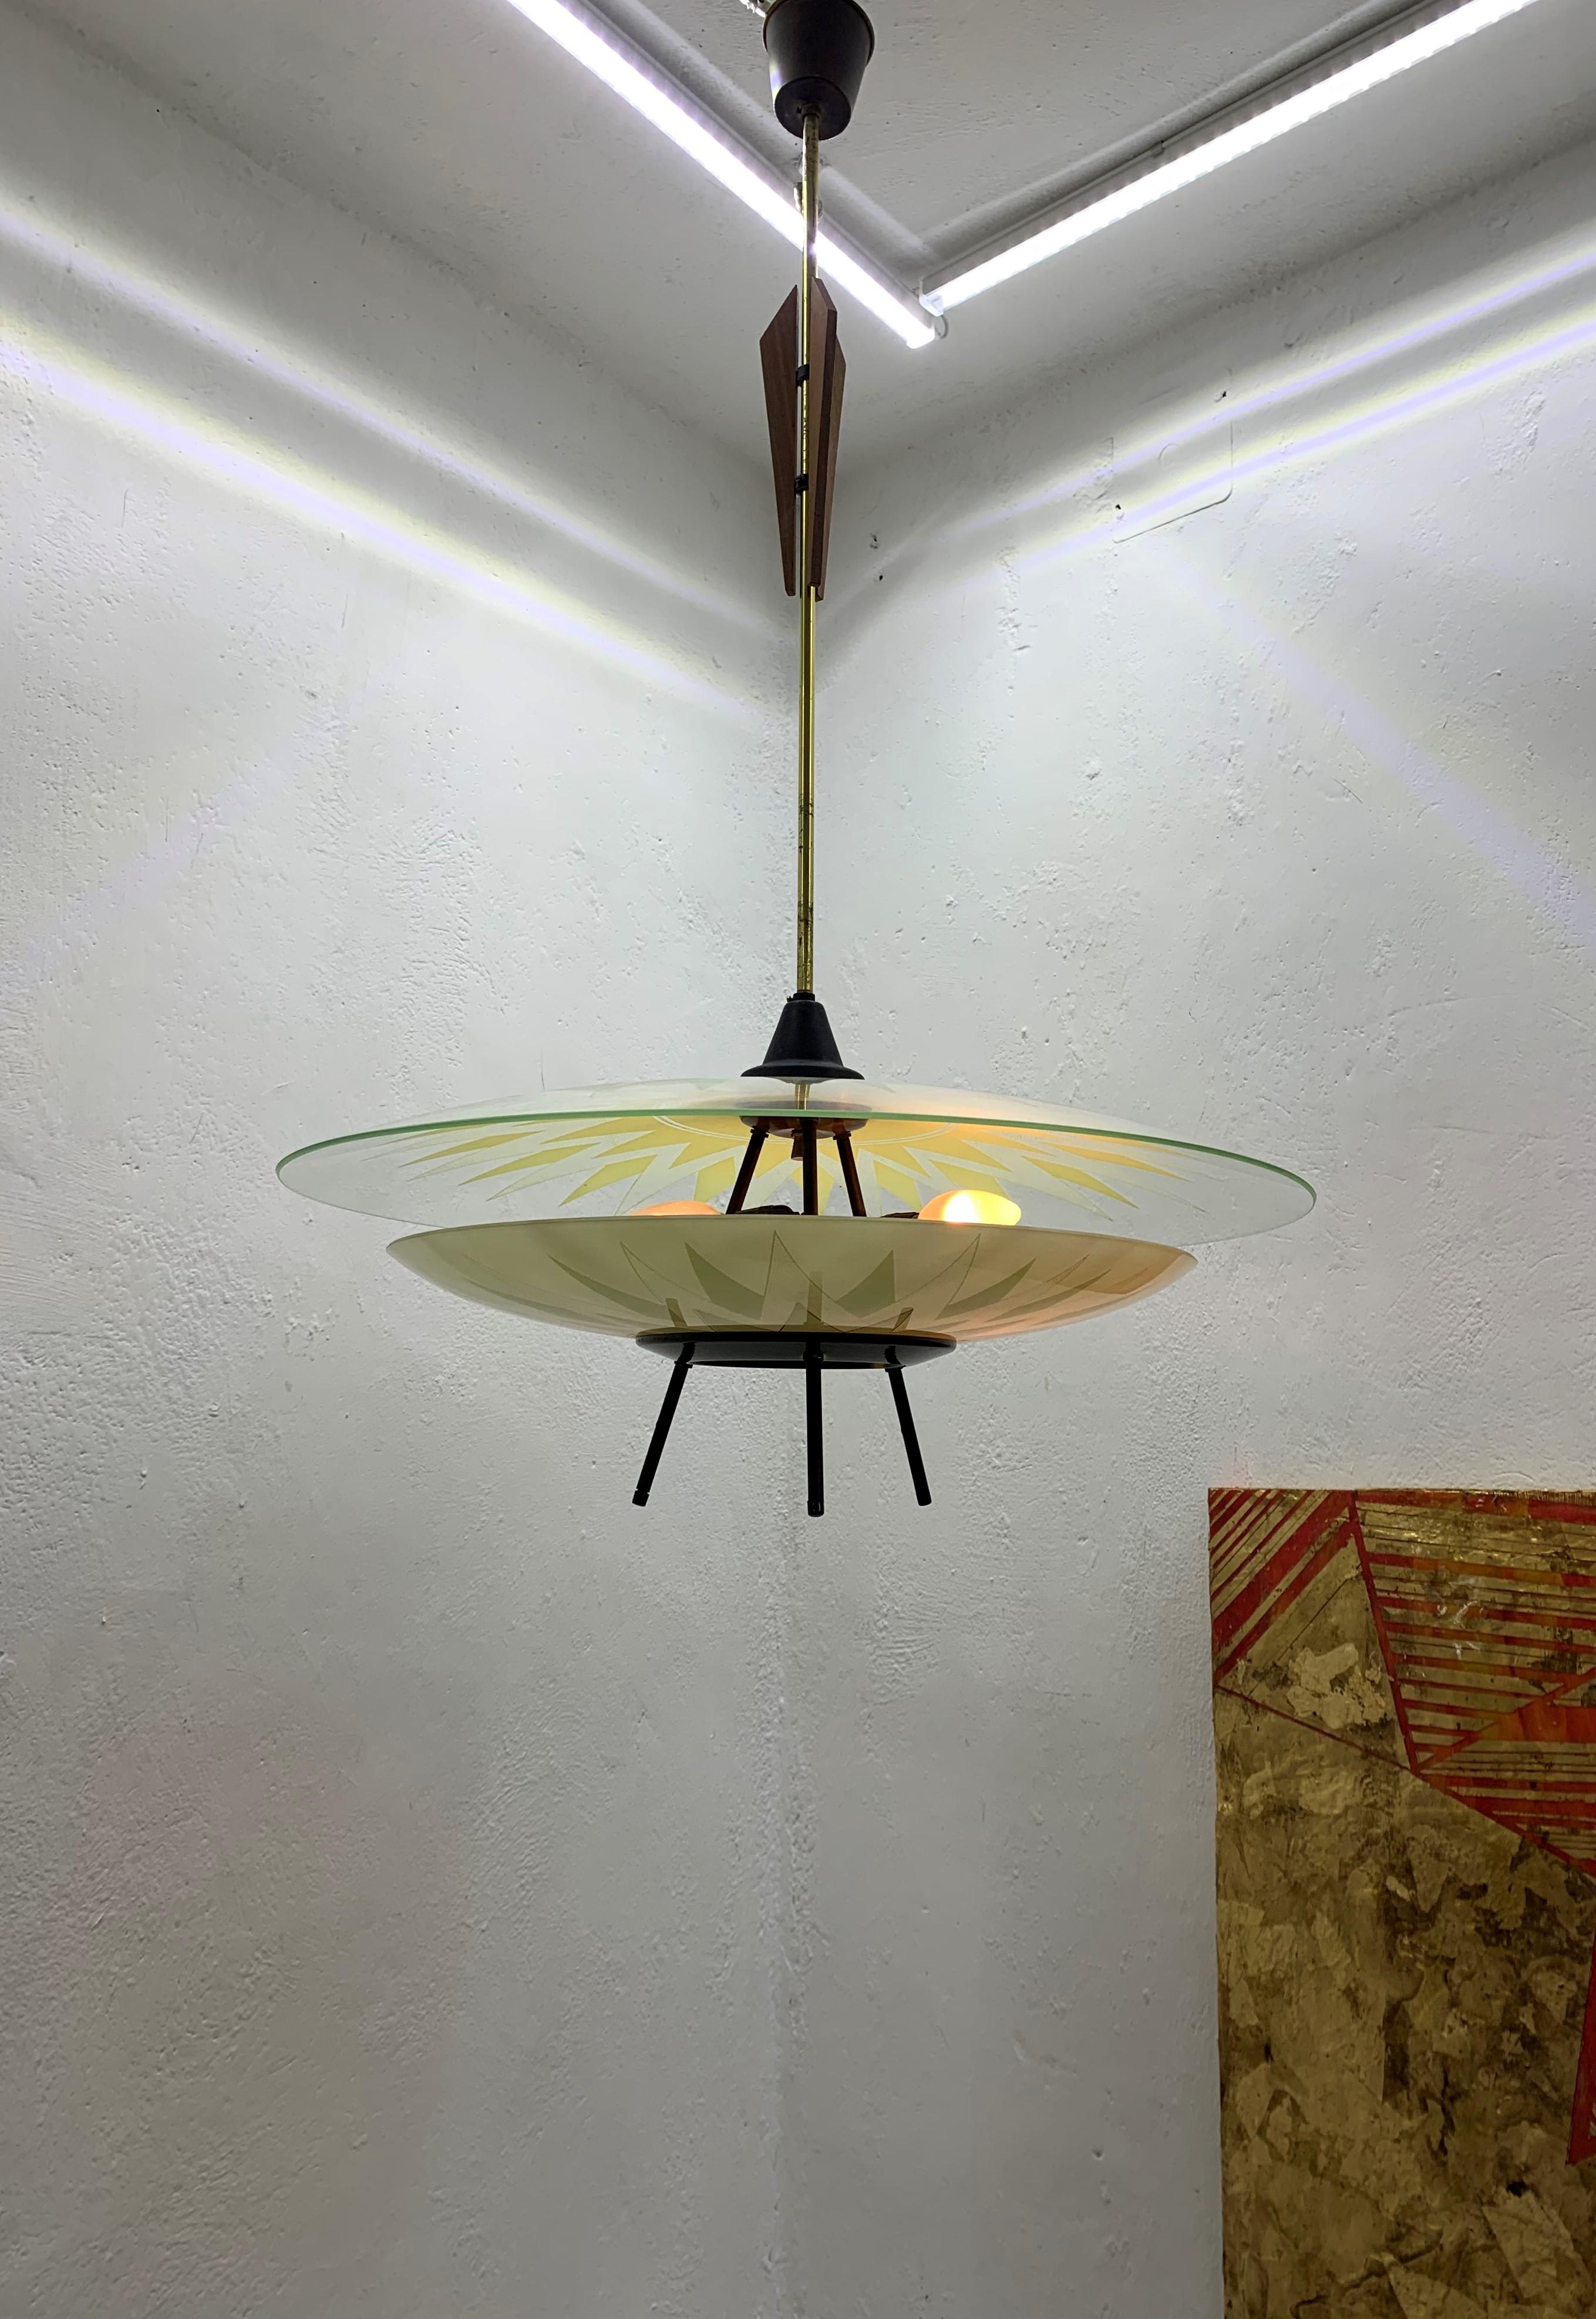 Large Mid-Century Modern three-light chandelier in the style of Fontana Arte in the shape of an UFO or Flying Saucer, in brass, teak and decorated glass, Italy, circa 1950.